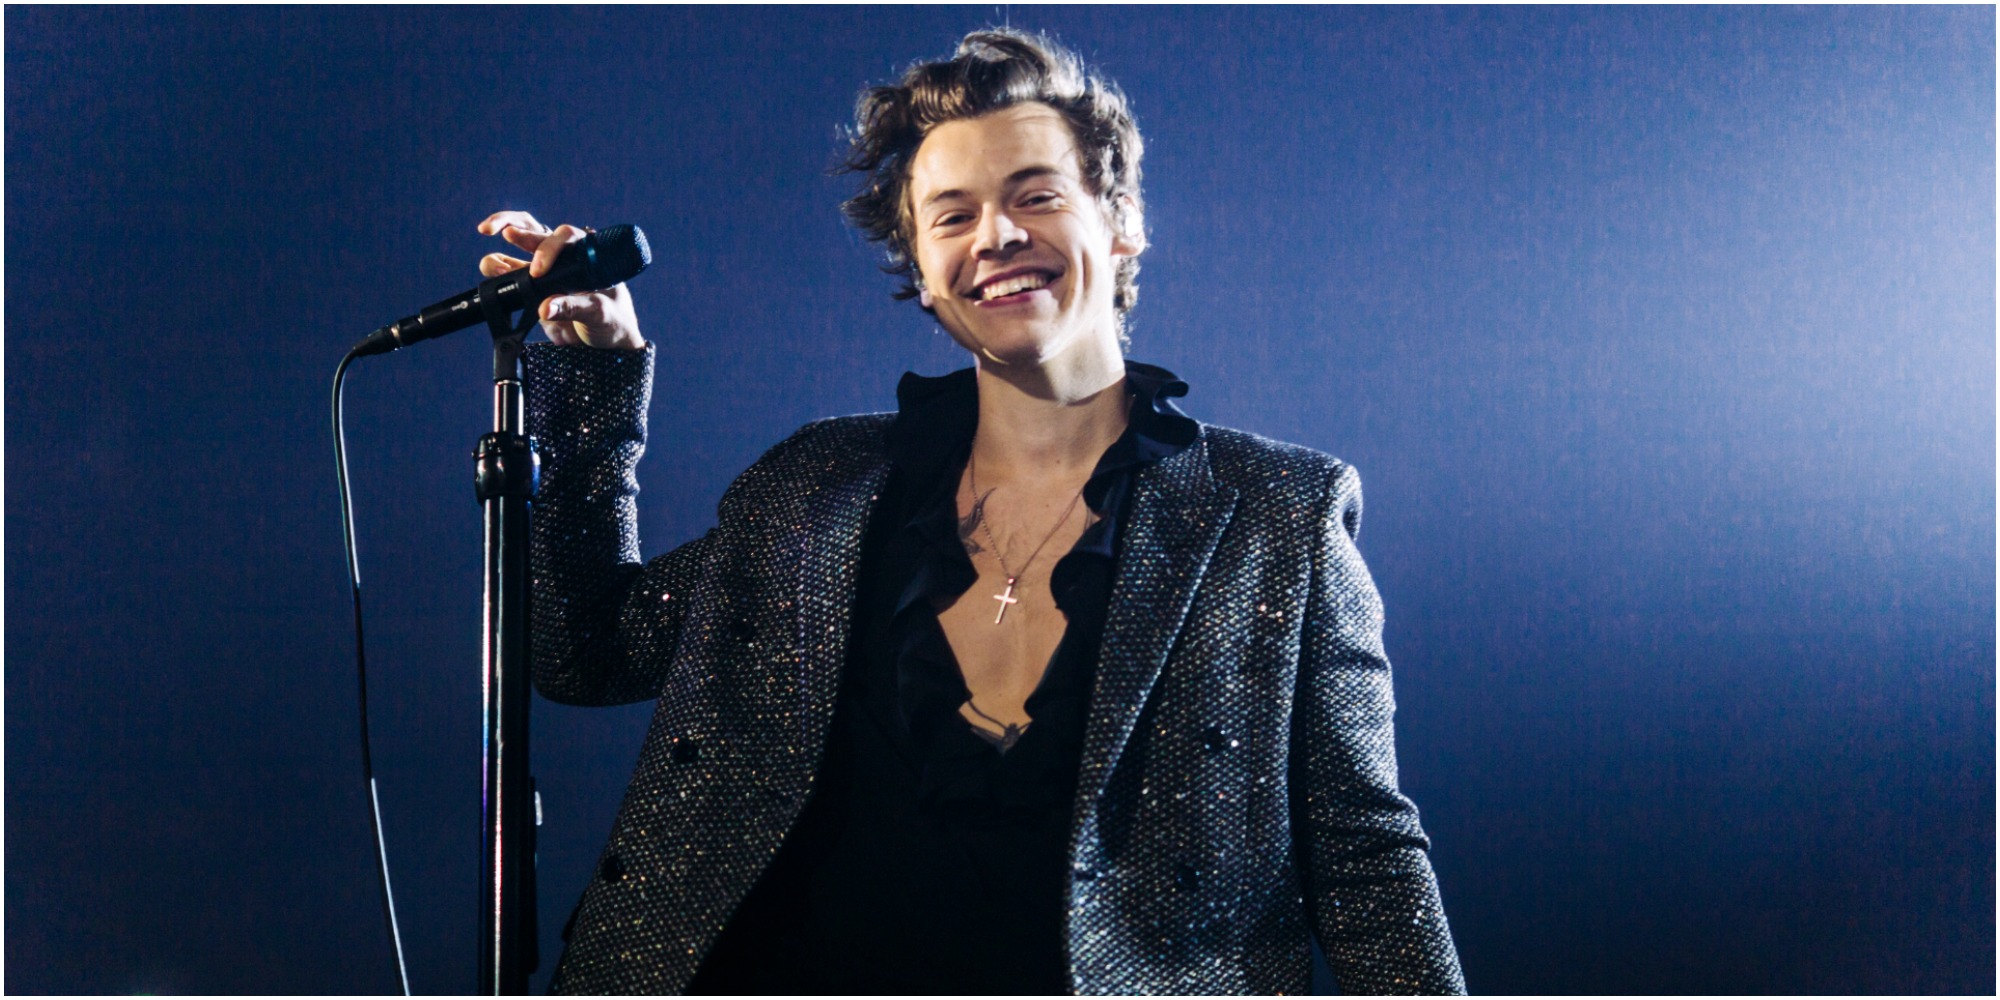 Harry Styles singing on stage wearing black leather during his European Tour.